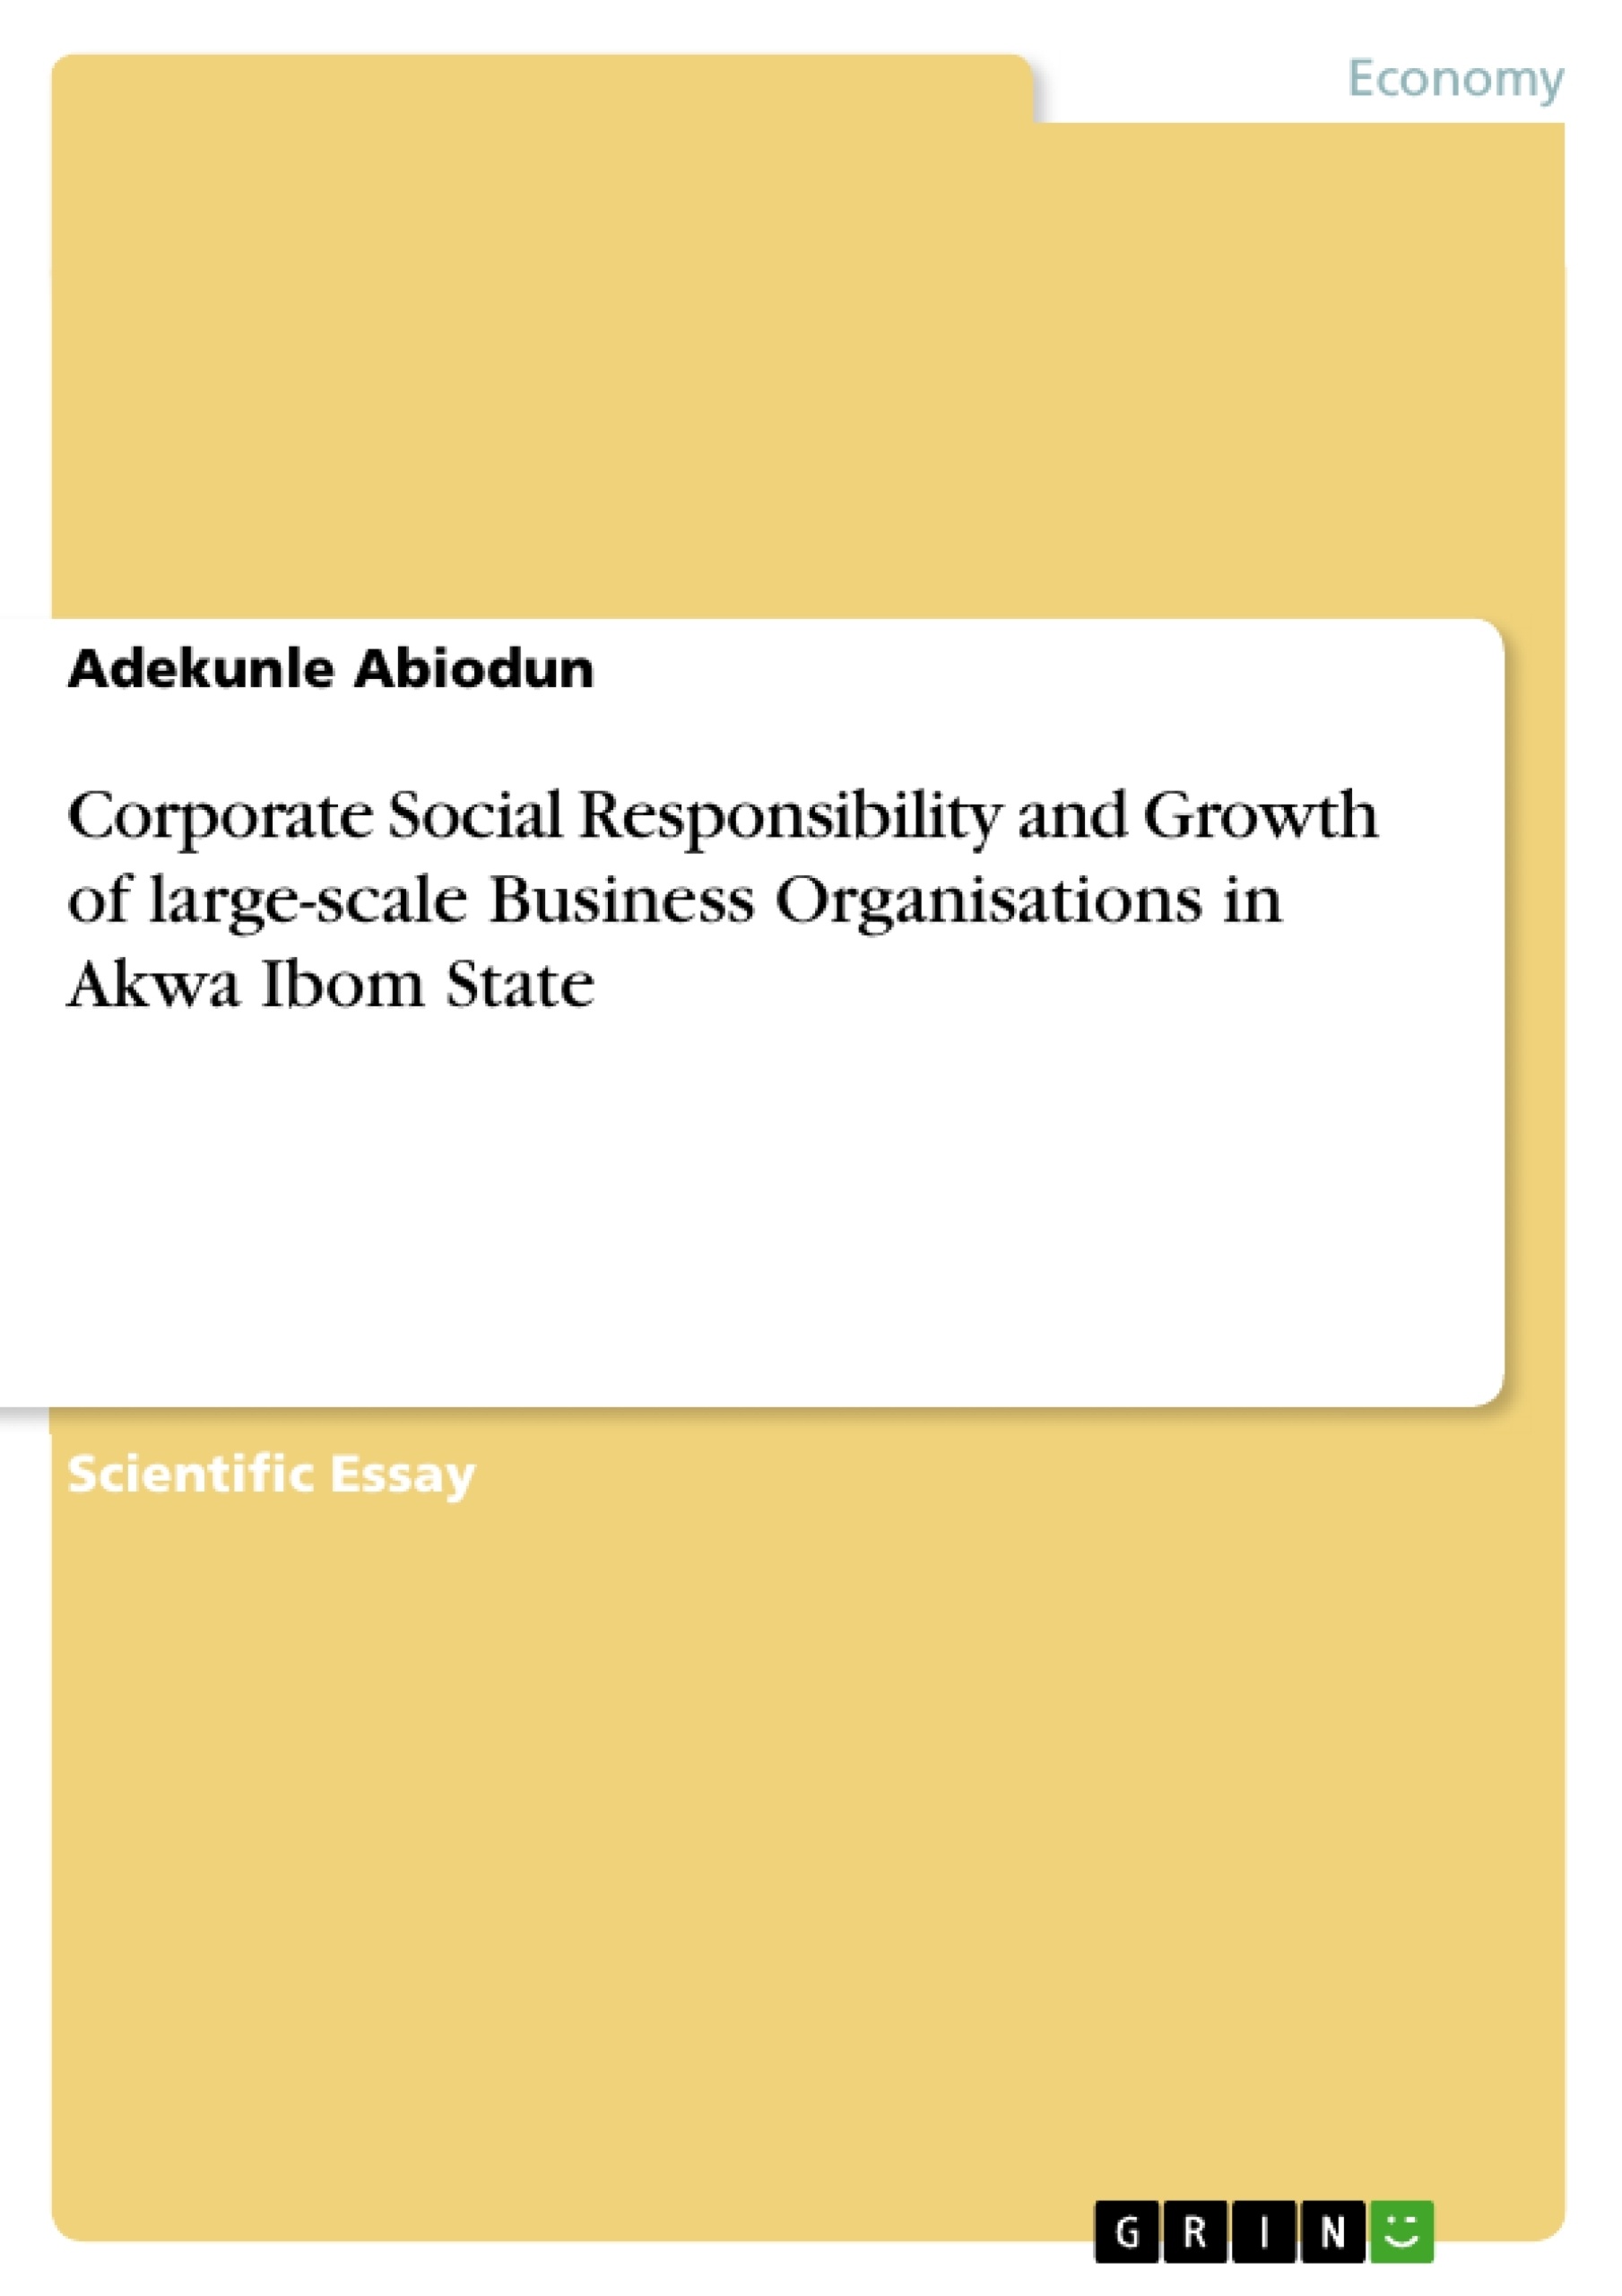 Title: Corporate Social Responsibility and Growth of large-scale Business Organisations in Akwa Ibom State